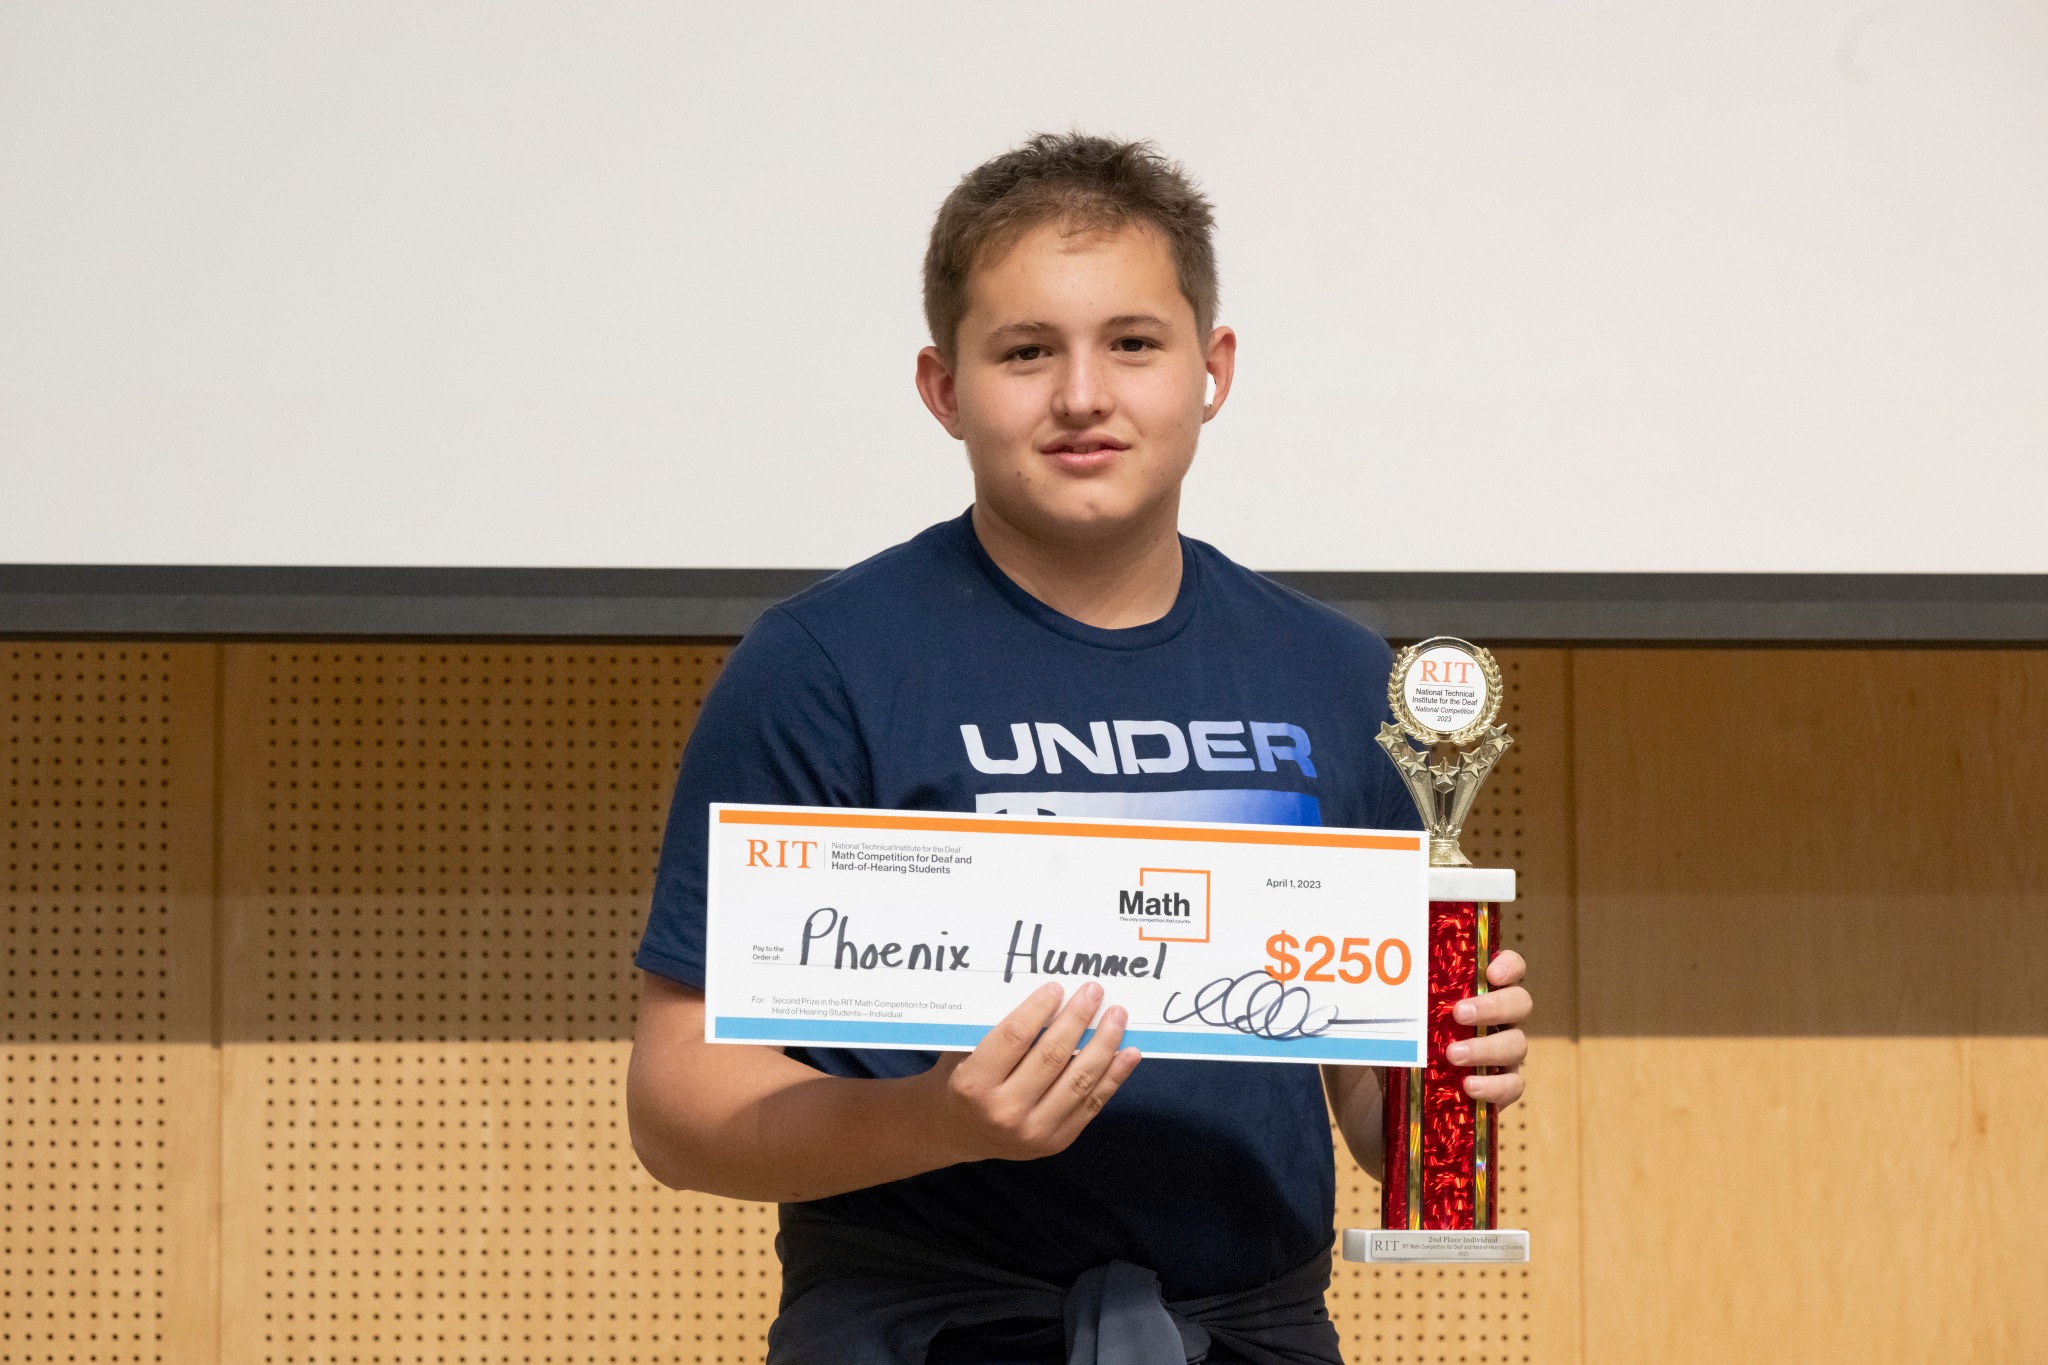 A middle school contestant from Texas School for the Deaf stands facing the camera, holding a trophy and a check for $250. The contestant is wearing a blue shirt.